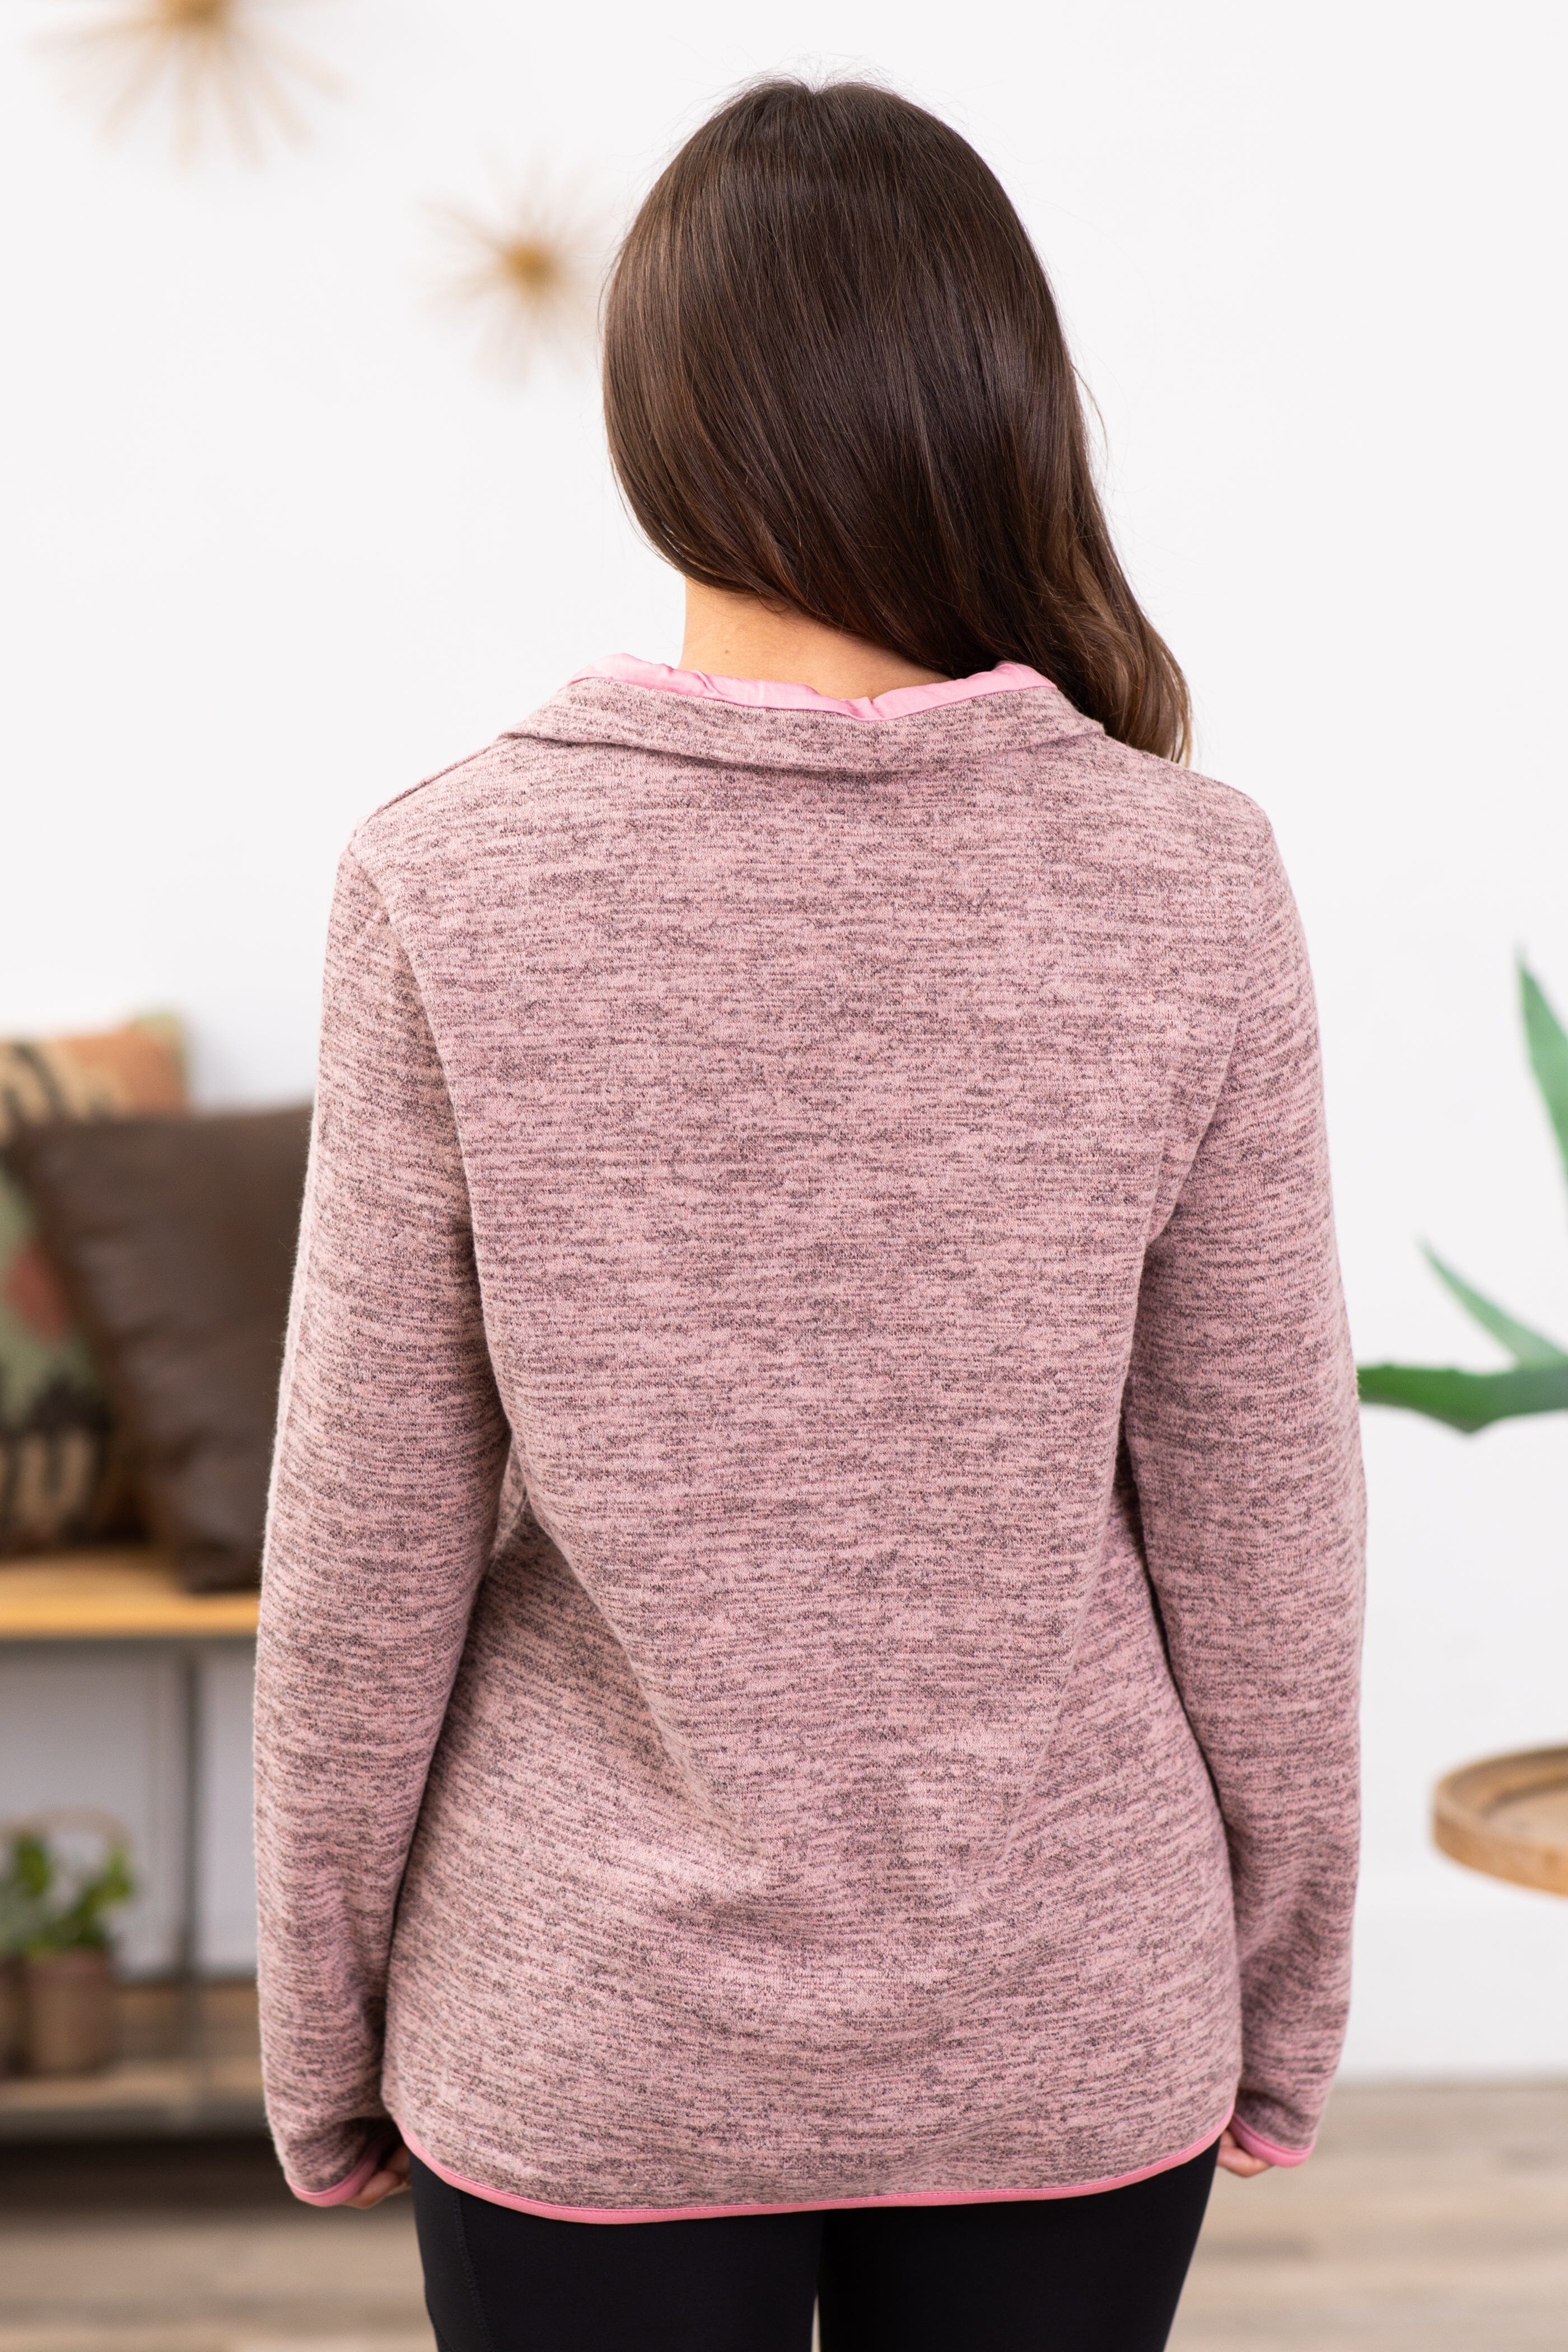 Dusty Rose Heathered 1/4 Zip Pull Over - Filly Flair